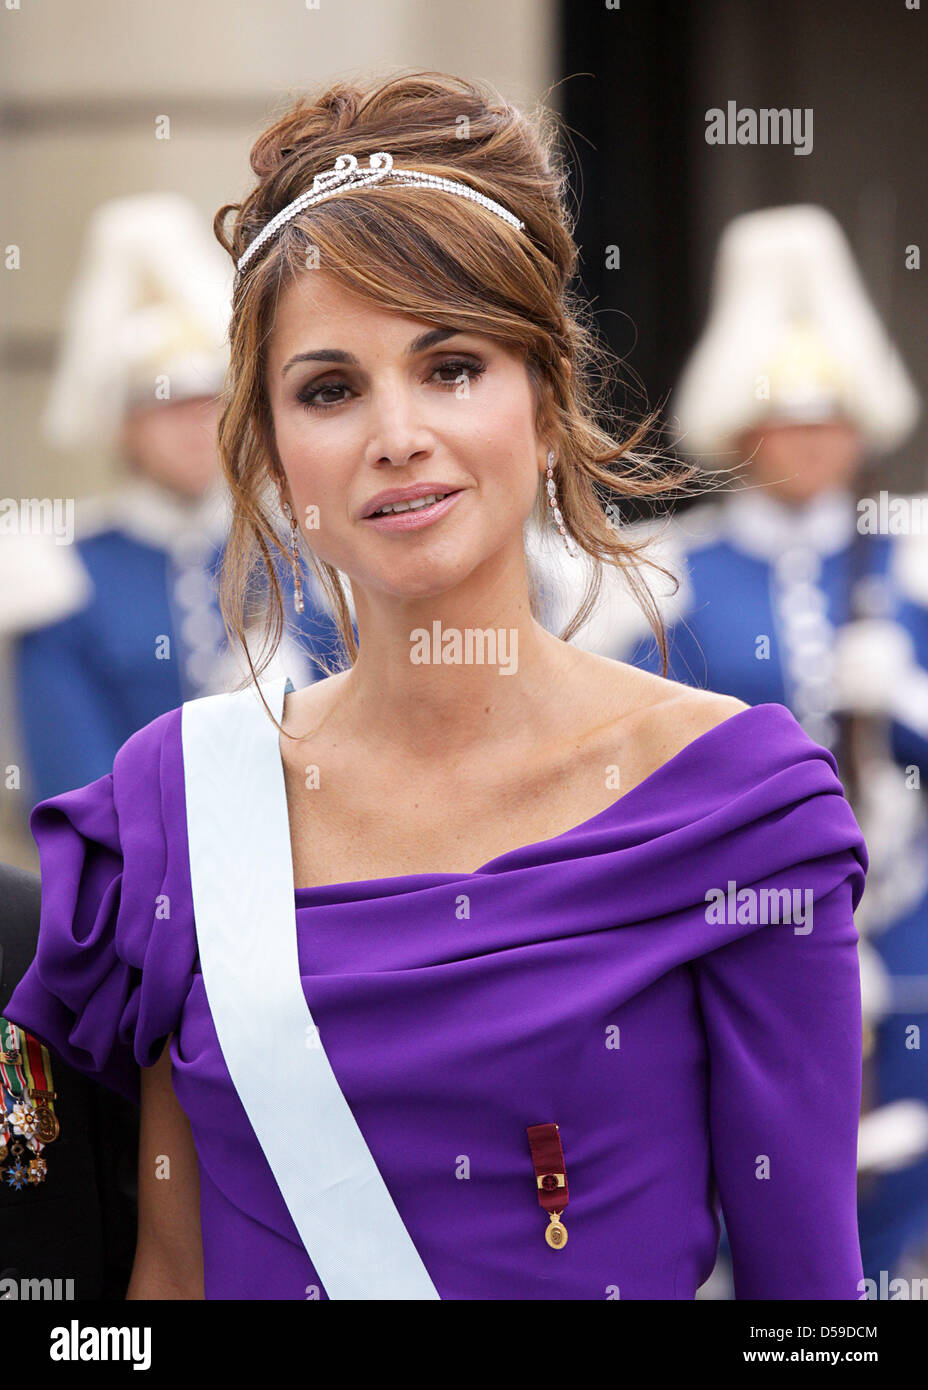 Queen Rania of Jordan arrives for the wedding of Crown Princess Victoria of Sweden and Daniel Westling in Stockholm, Sweden, 19 June 2010. Photo: Albert Nieboer (NETHERLANDS OUT) Stock Photo